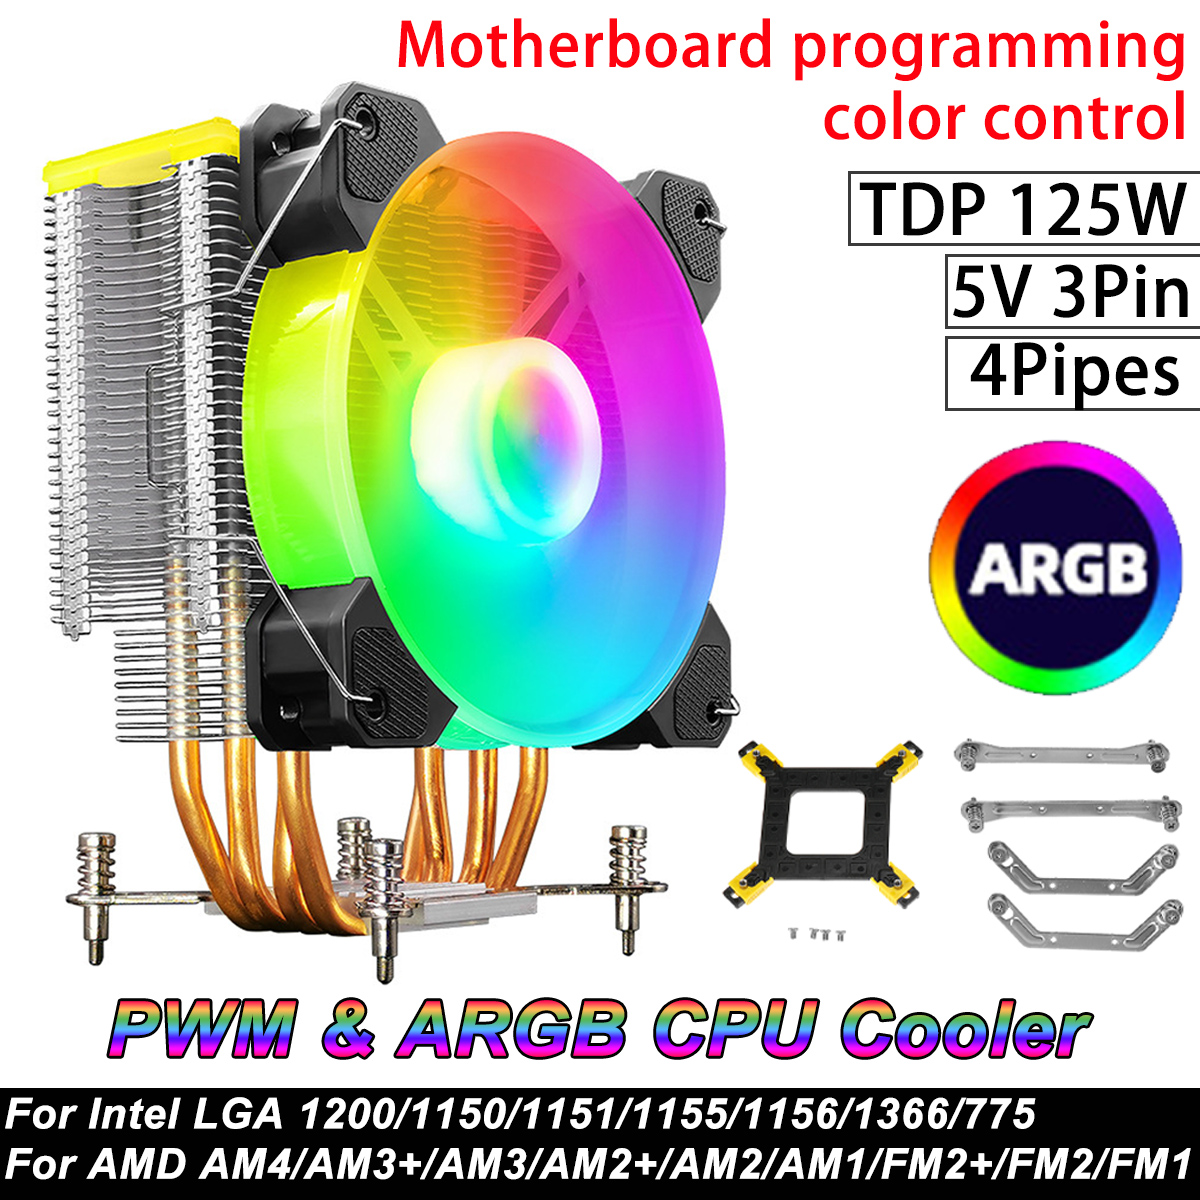 COOLMOON X400 ARGB CPU Cooler 4 Heat Pipes 5V 3Pin TDP 125W For Intel/AMD